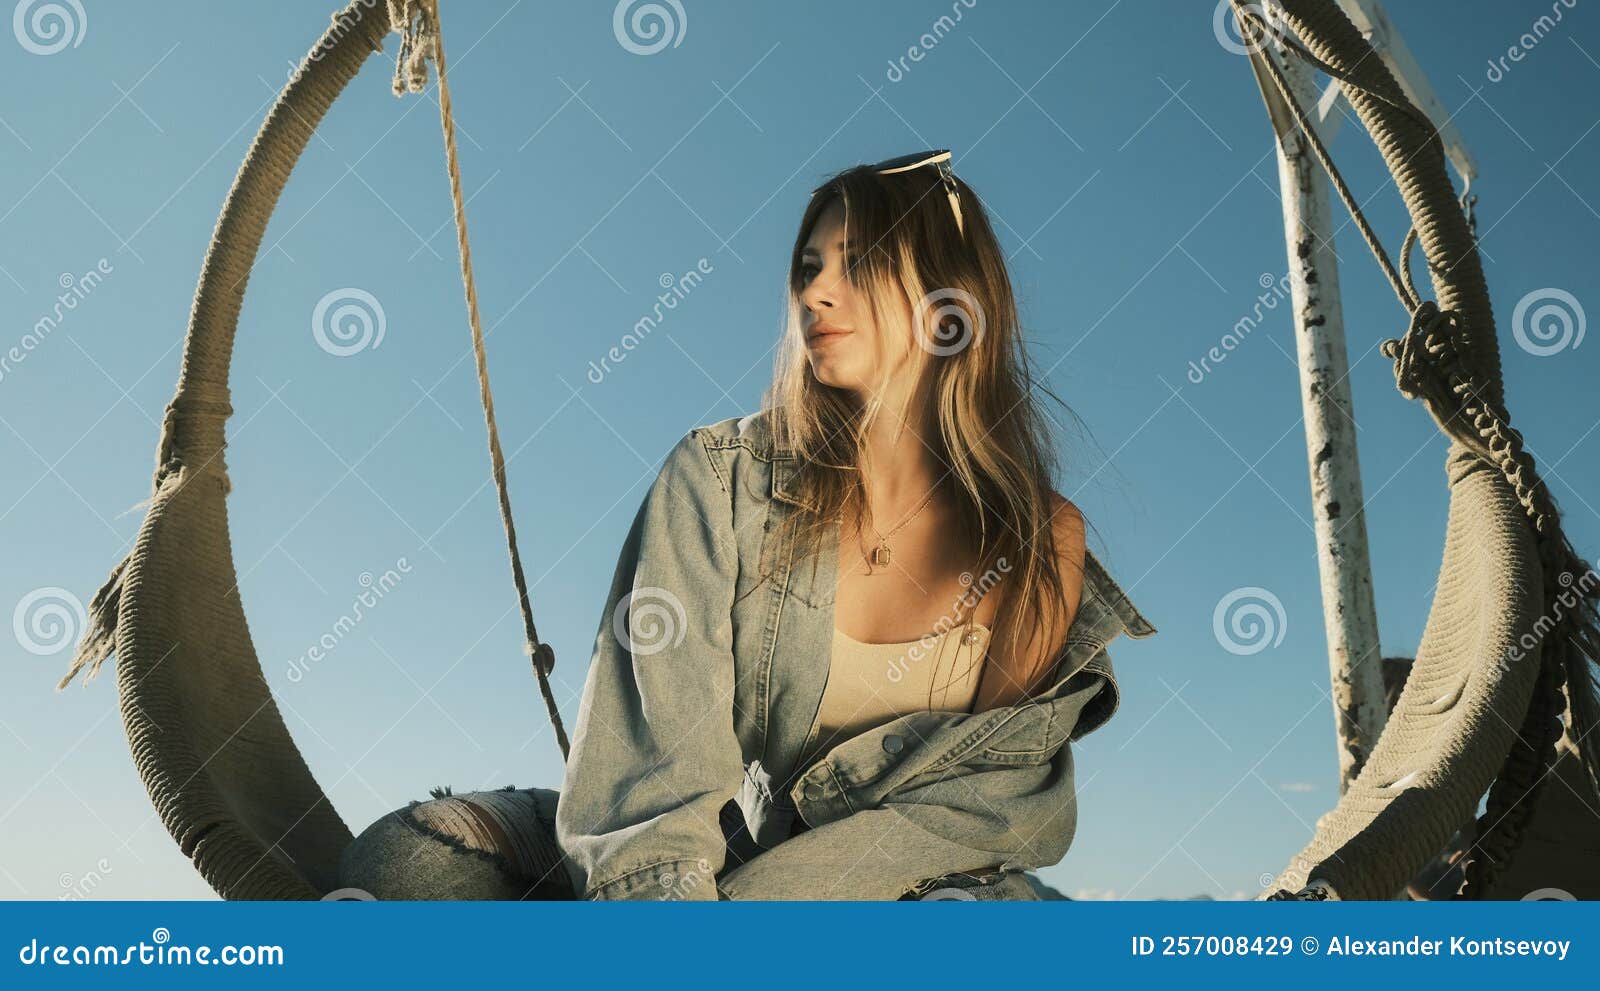 Girl Sits on a Swing and Looks Away Stock Image - Image of girl, summer ...